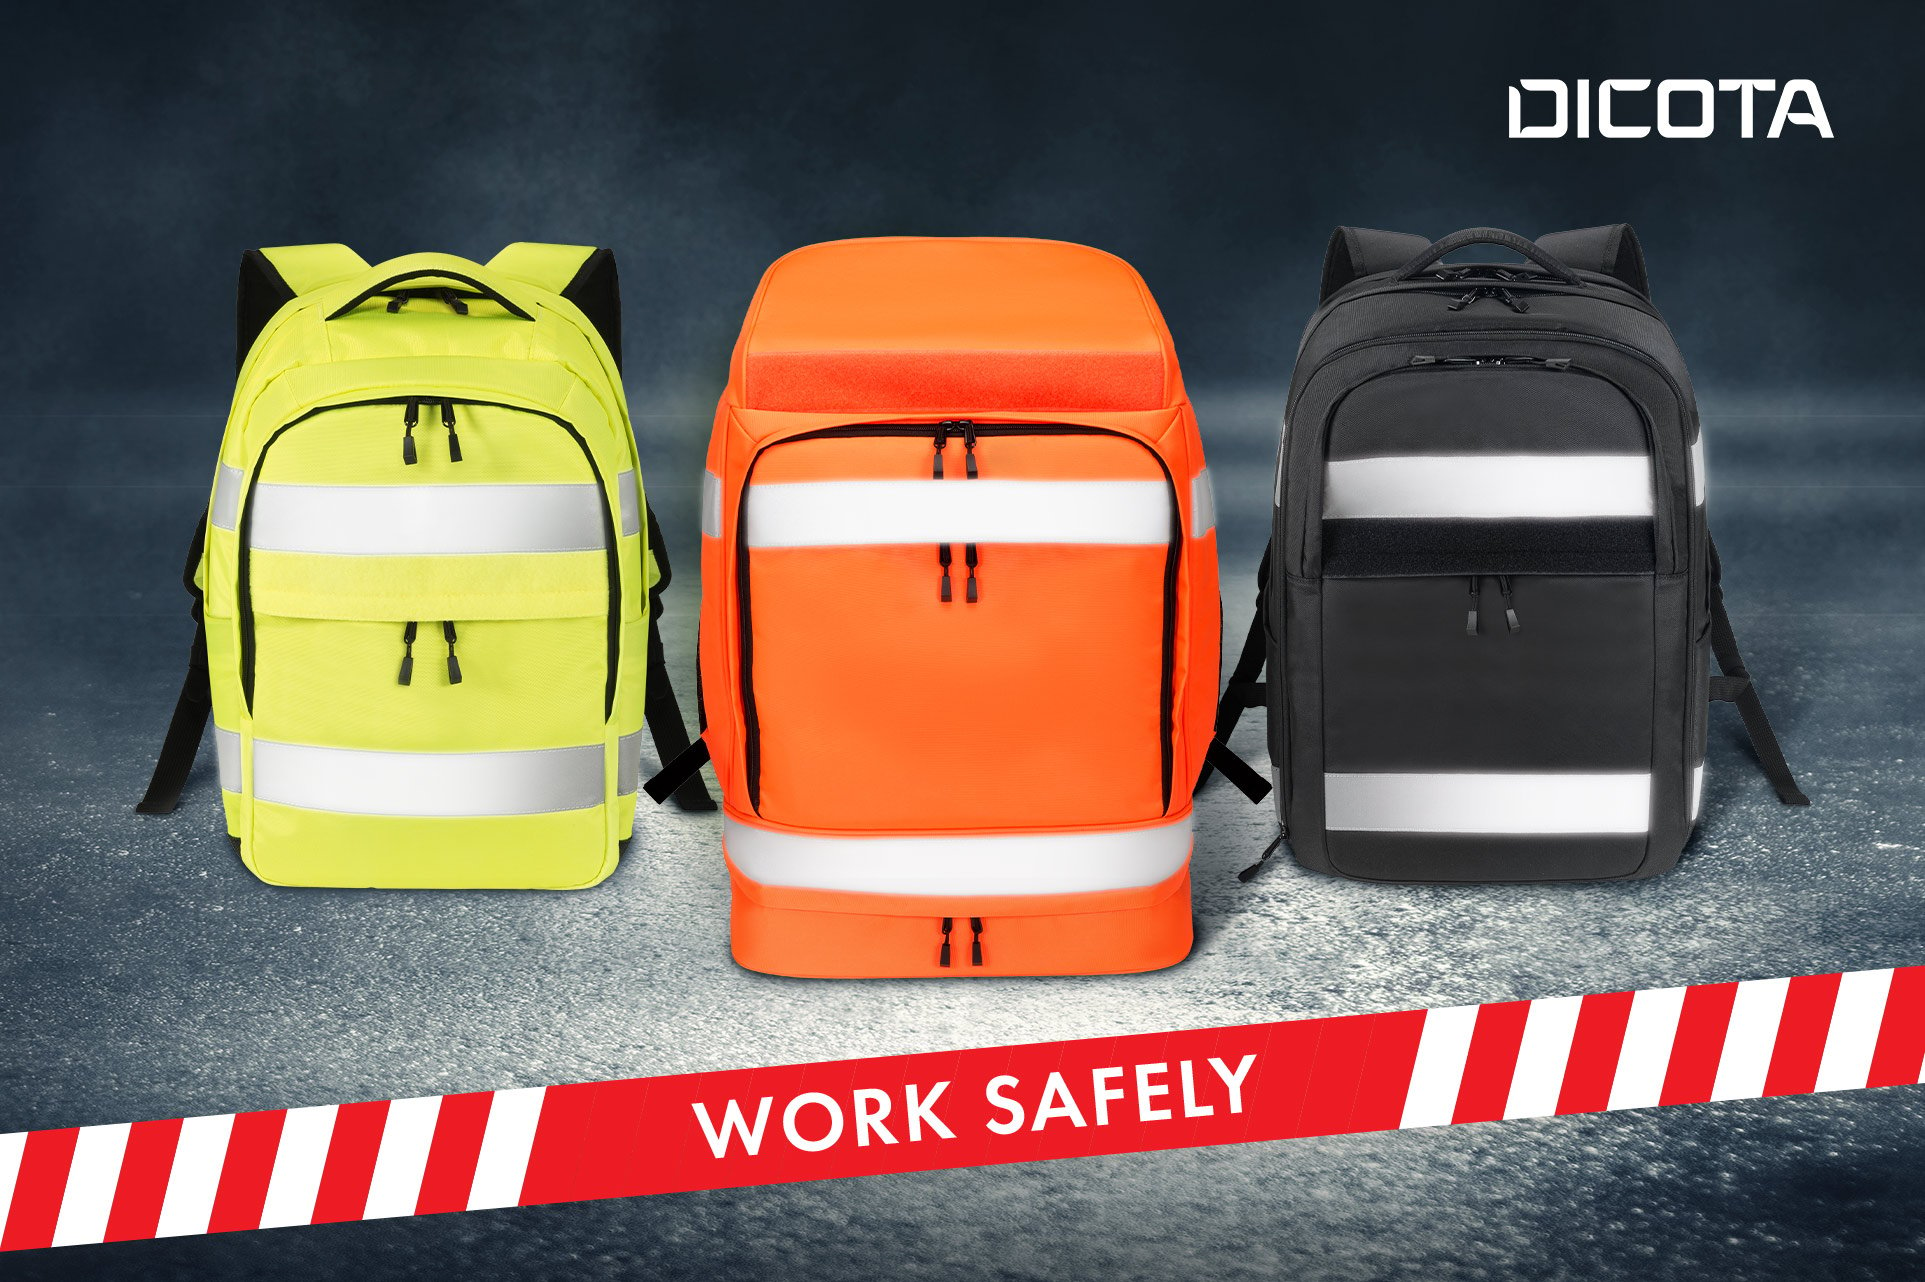 Work safely with high visibility backpacks